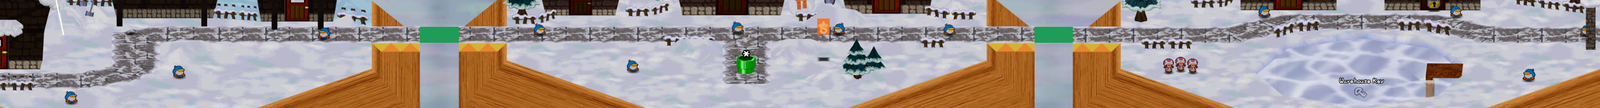 The characters in the open area of Shiver City. (The penguin patrol and the two extra penguins on the frozen pond in the east scene are not shown.)